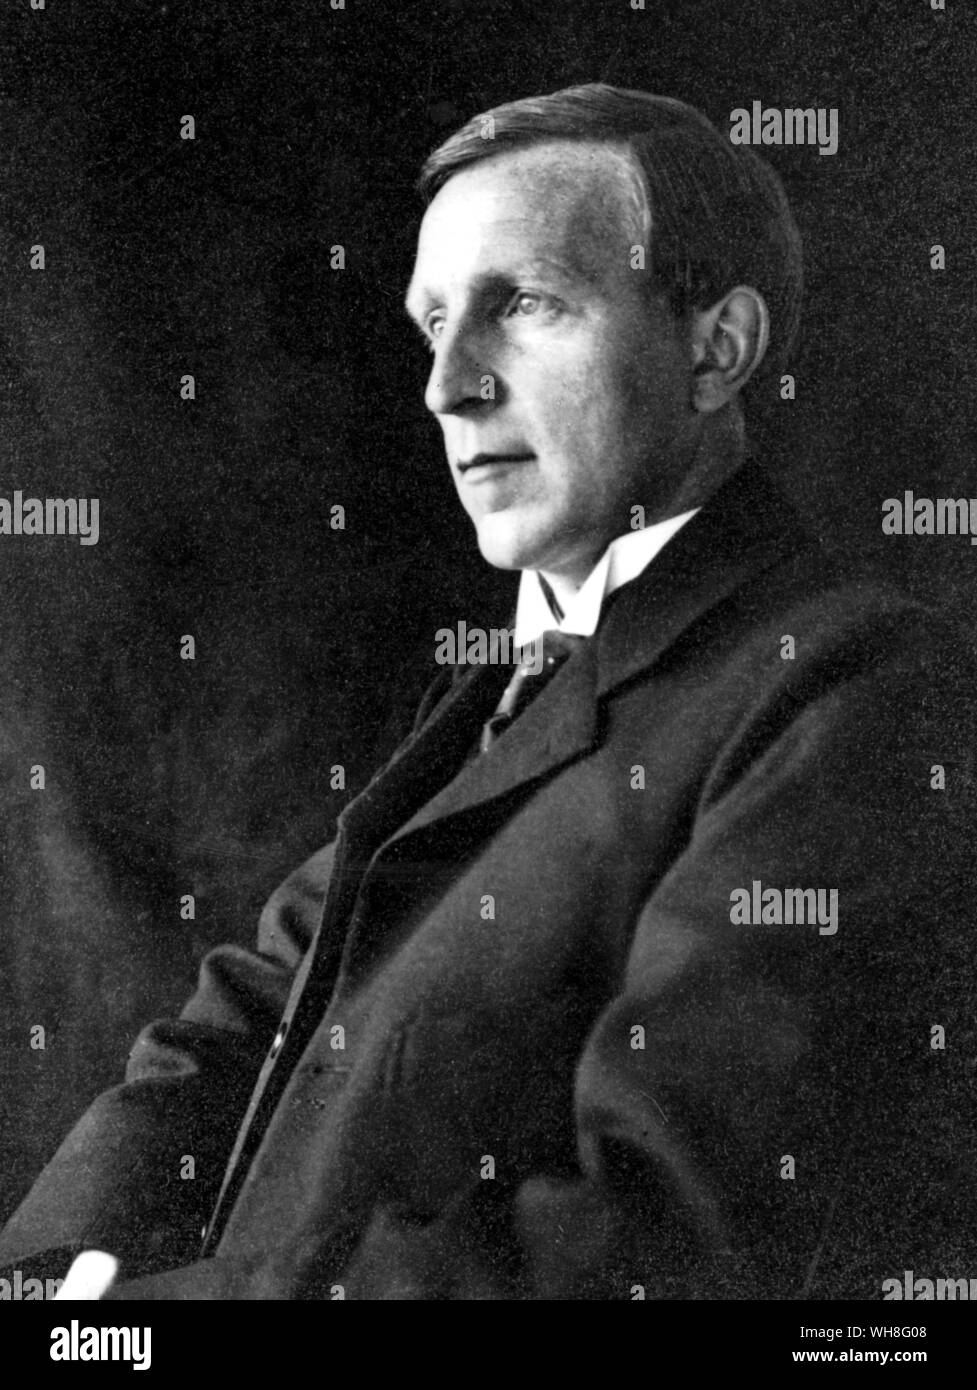 Father of W H Auden, Dr George Augusus Auden 1907.. W H Auden, The Life of a Poet, by Charles Osborne.. . Stock Photo